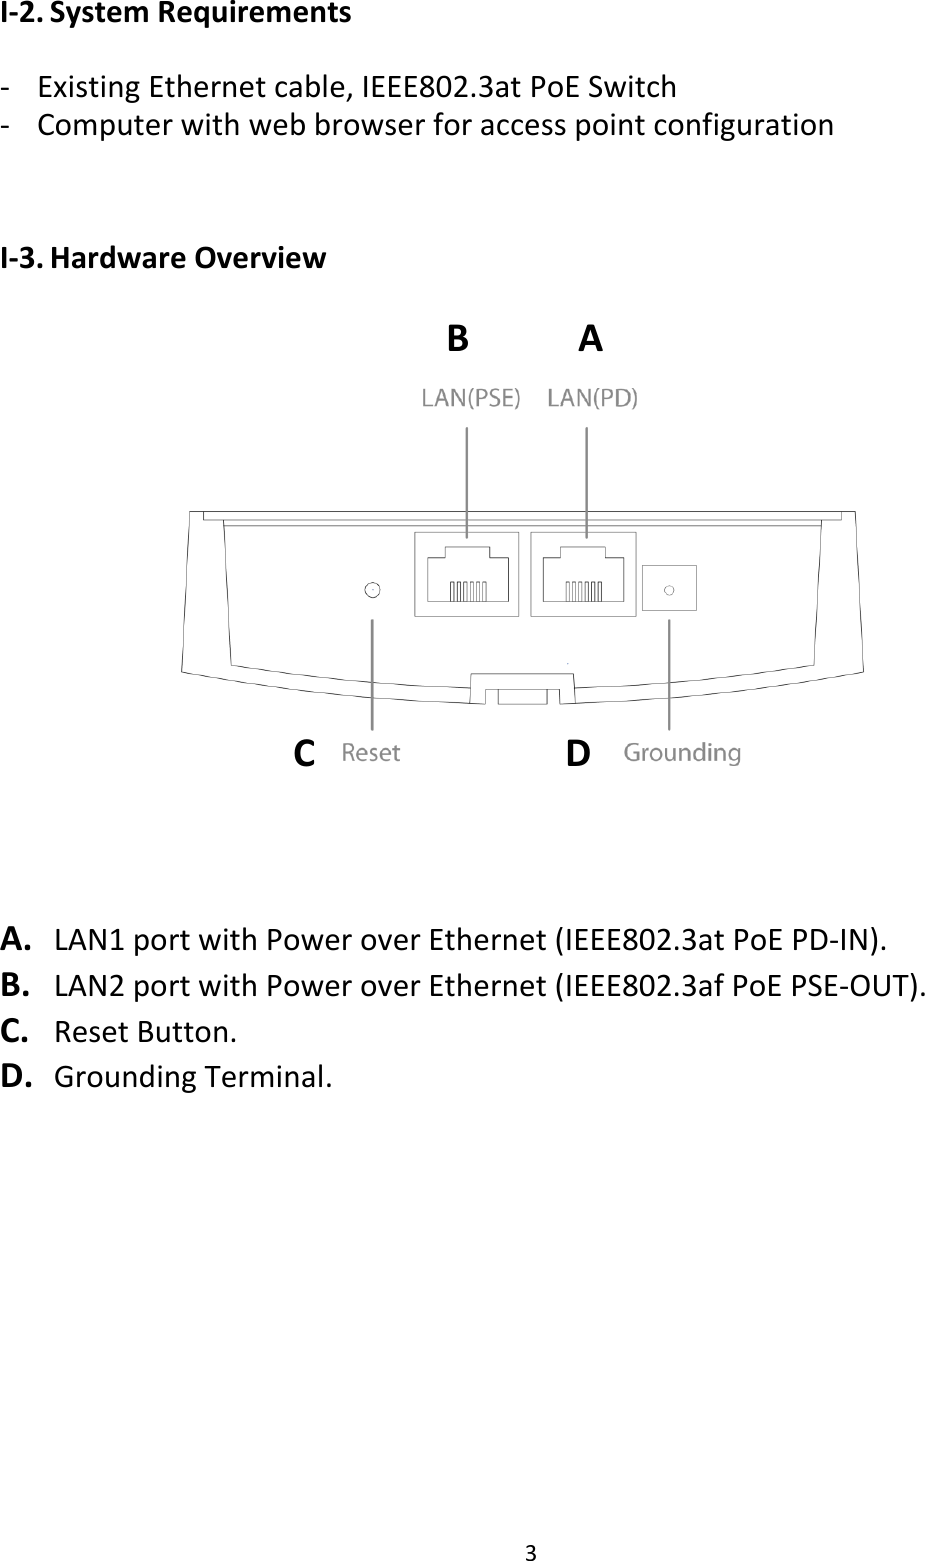 3  I-2. System Requirements  - Existing Ethernet cable, IEEE802.3at PoE Switch - Computer with web browser for access point configuration   I-3. Hardware Overview   A.   LAN1 port with Power over Ethernet (IEEE802.3at PoE PD-IN). B.   LAN2 port with Power over Ethernet (IEEE802.3af PoE PSE-OUT). C.   Reset Button. D.   Grounding Terminal.          B   A    C                        D 